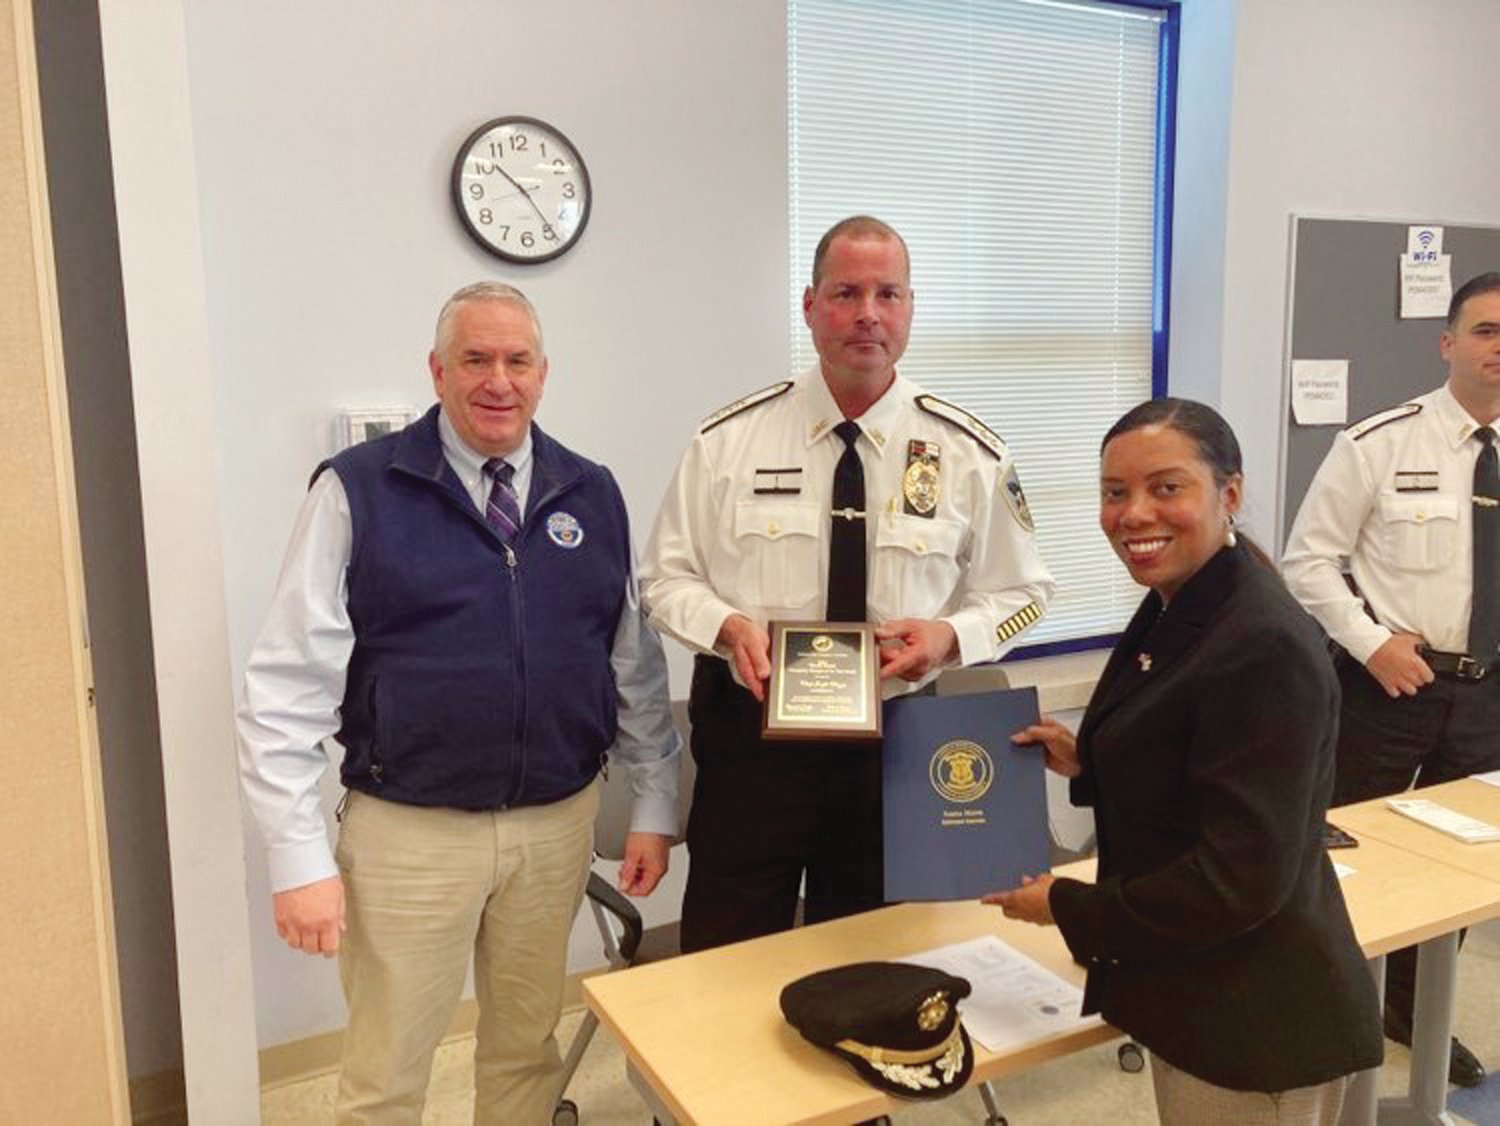 EMERGENCY MANAGER OF THE YEAR: Johnston Police Chief Joseph Razza is presented with the Emergency Manager of the Year Award by Rhode Island Emergency Management Agency Director Marc Pappas and Lieutenant Governor Sabina Matos for excellence, dedication and accomplishment in emergency management.